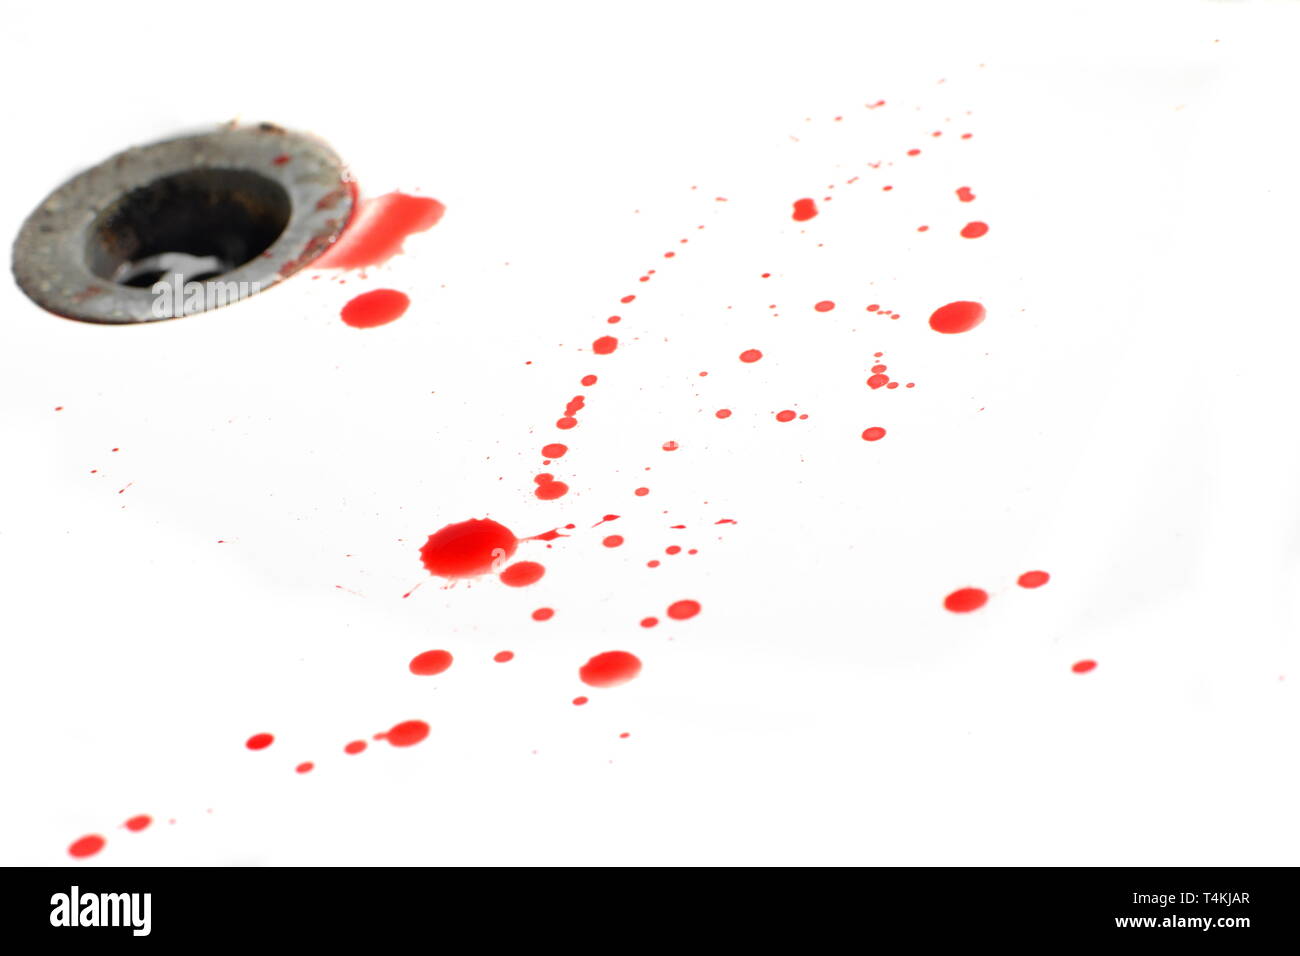 Blood spatter Stock Photo